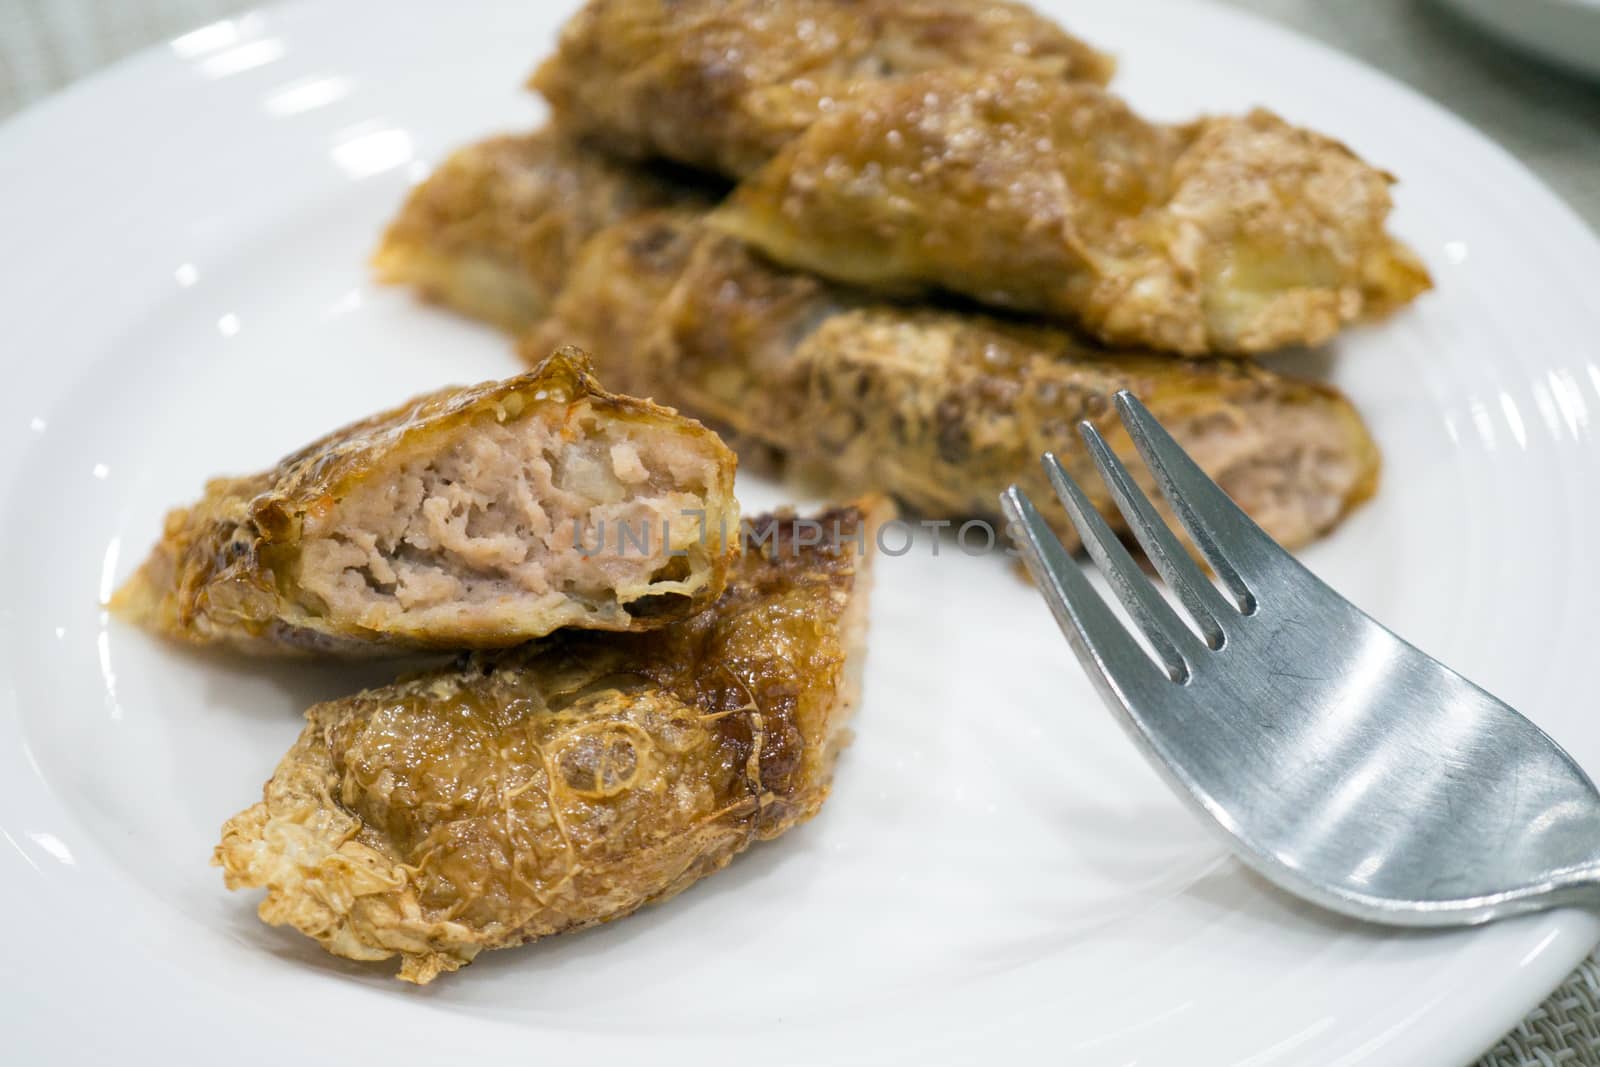 Penang Loh Bak is pork marinated in Chinese five spice powder, mixed with various ingredients, snugly rolled up with a sheet of bean curd and fried till crispy.